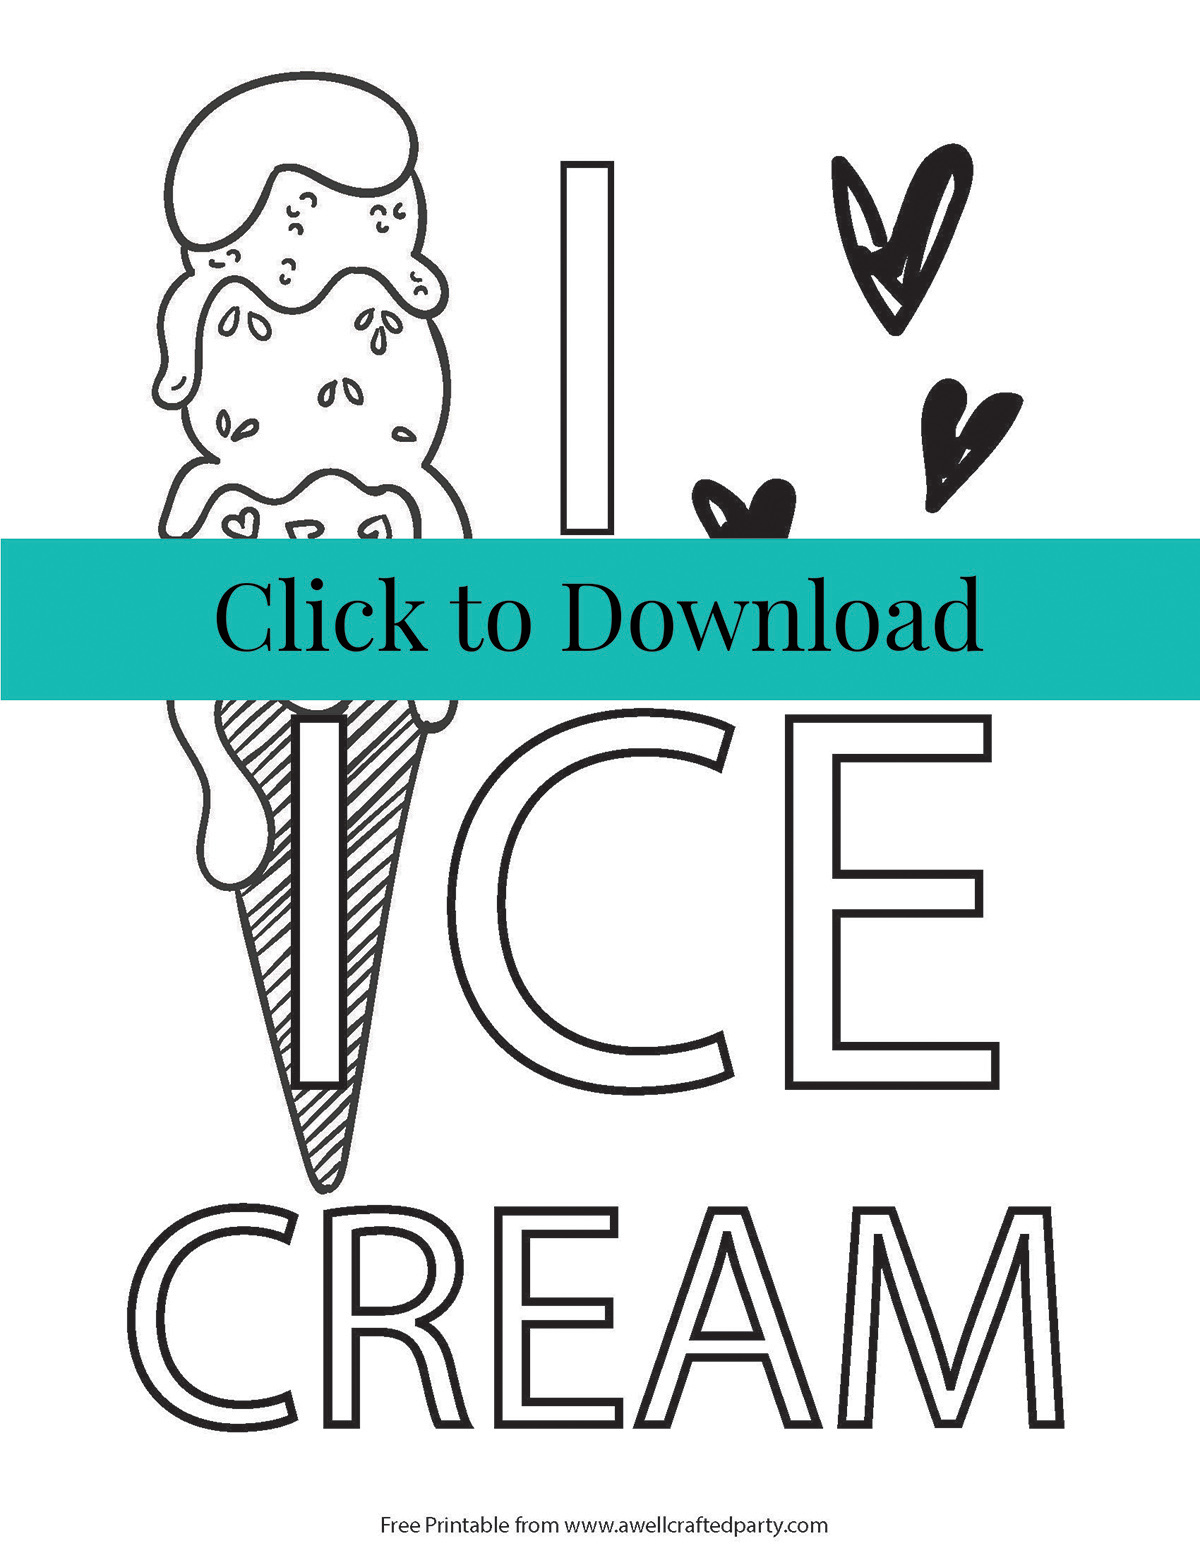 Ice Cream Coloring Sheet Free Printable | A Well Crafted Party